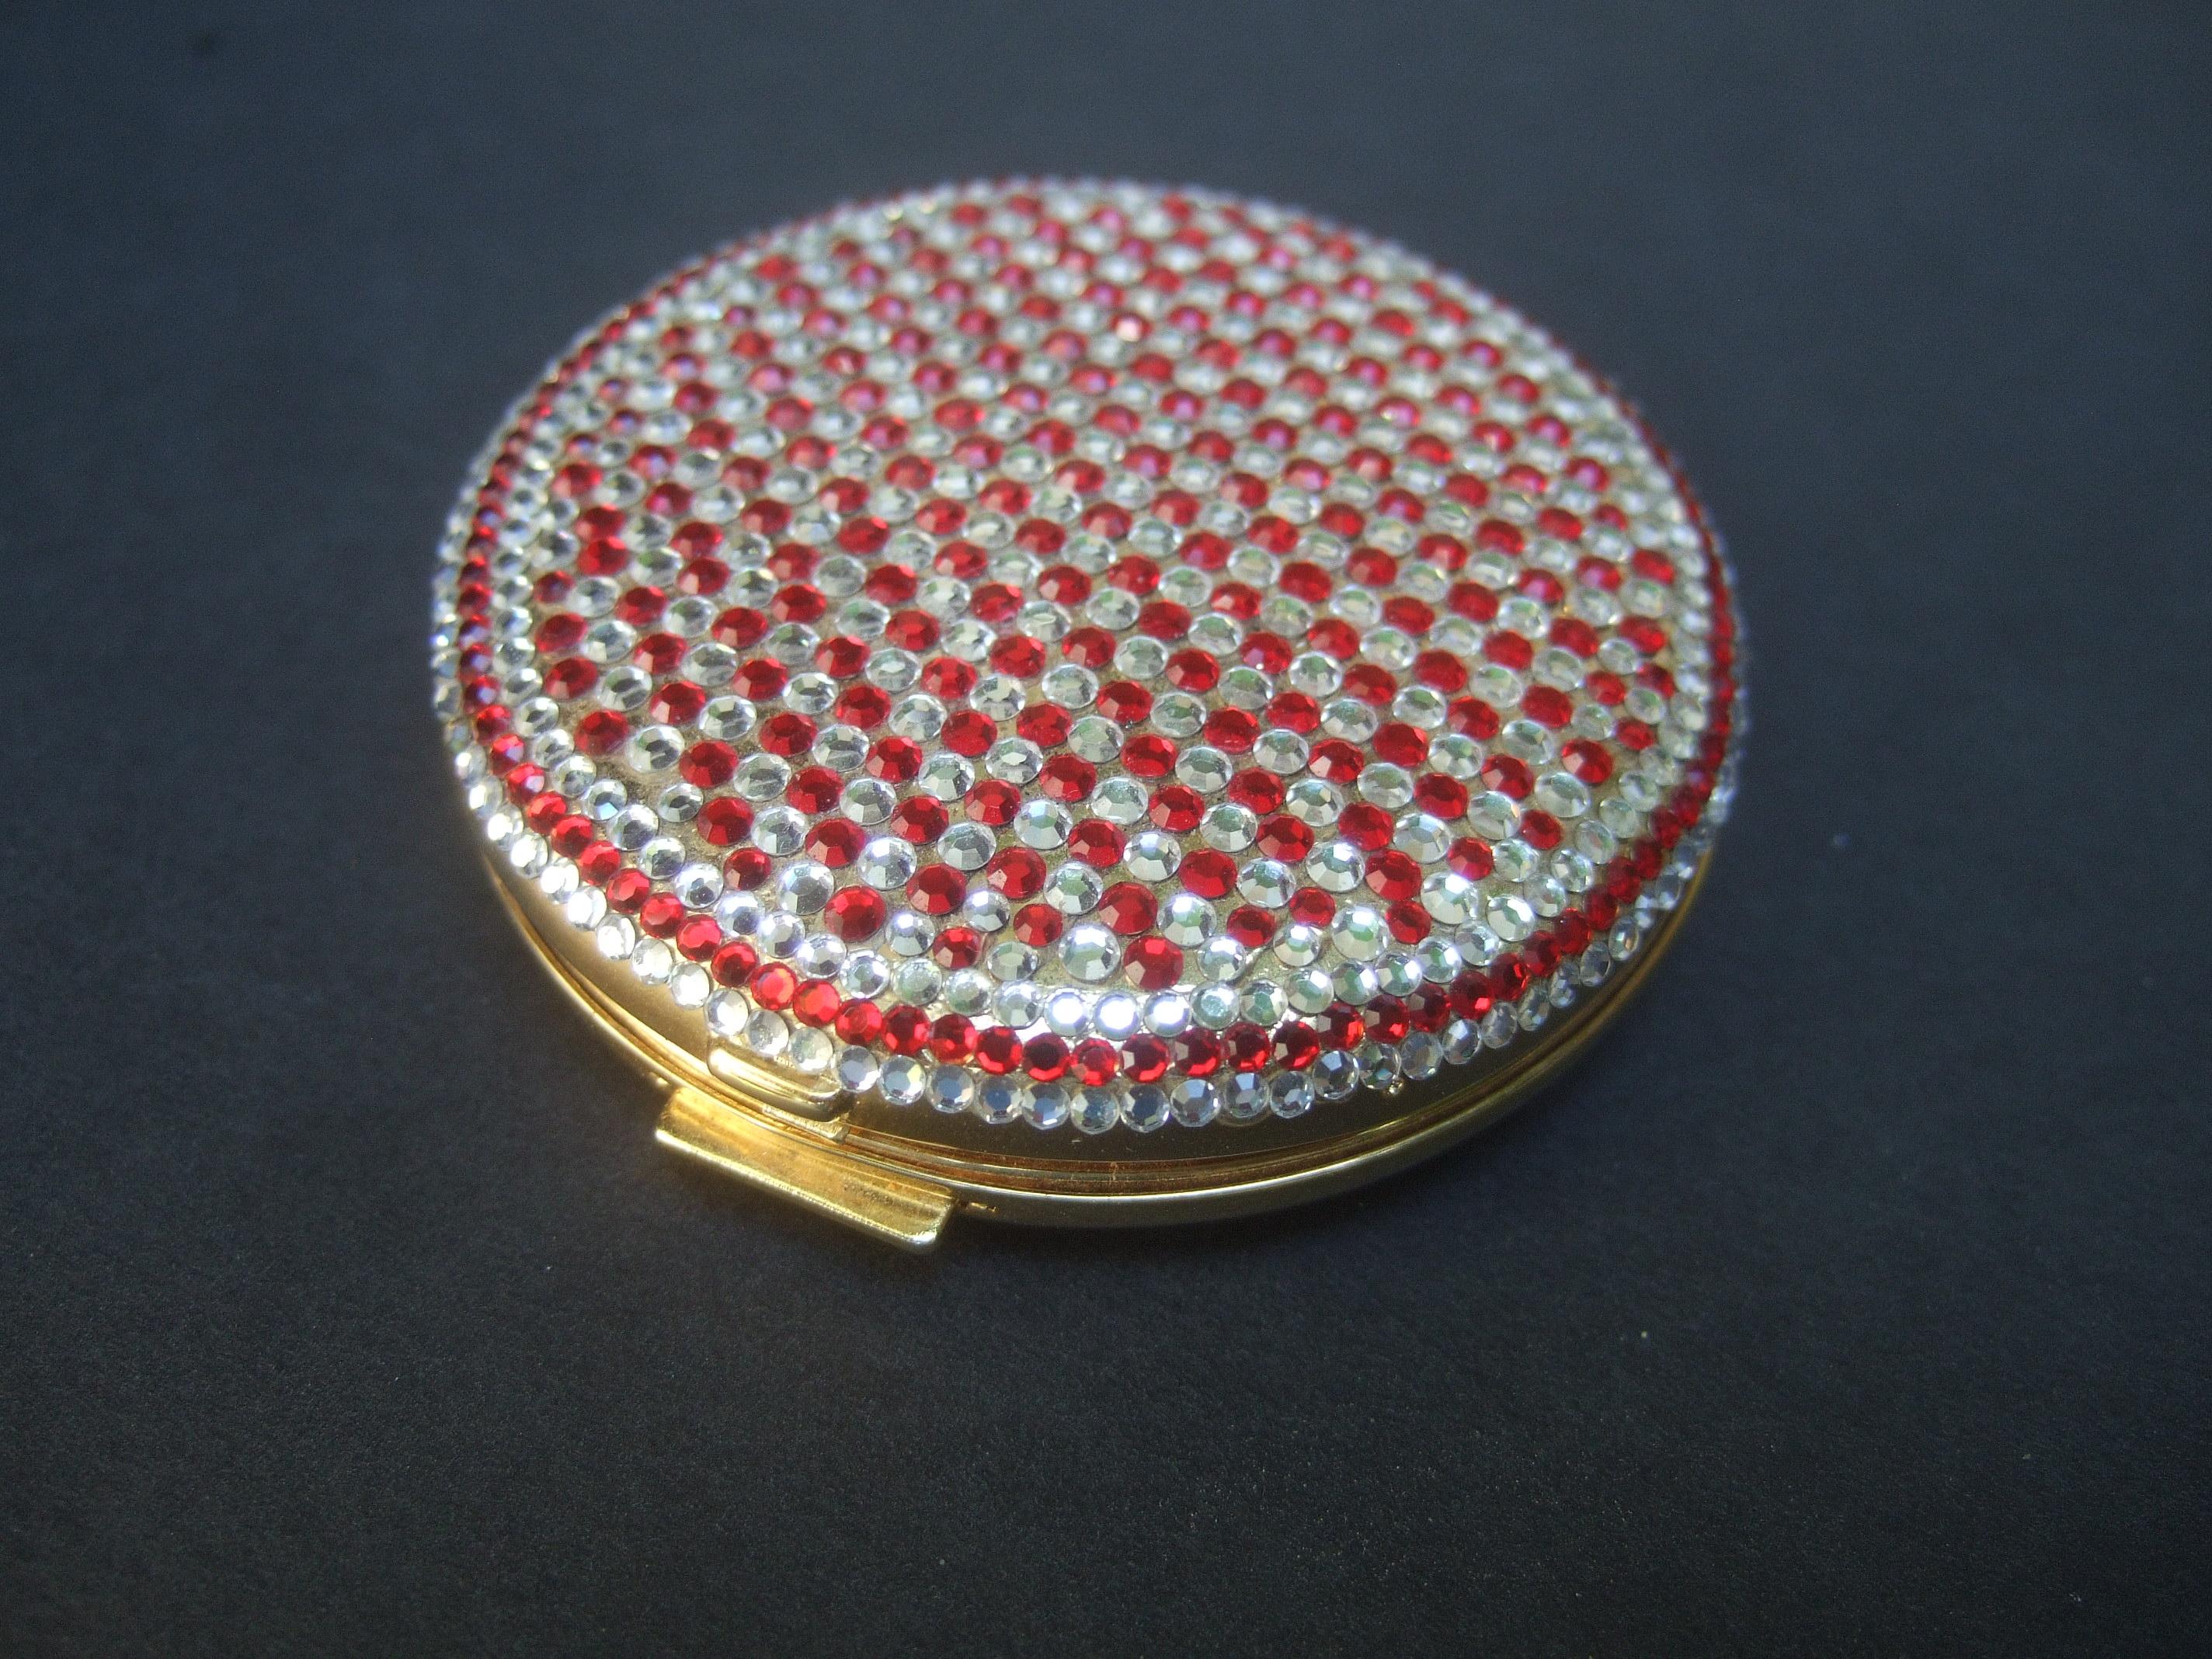 Judith Leiber Crystal encrusted vanity compact c 1980s
The elegant compact lid cover is embellished with rows of ruby red and clear diamante crystals in a geometric checkerboard pattern 

The interior is designed with a small circular vanity mirror.